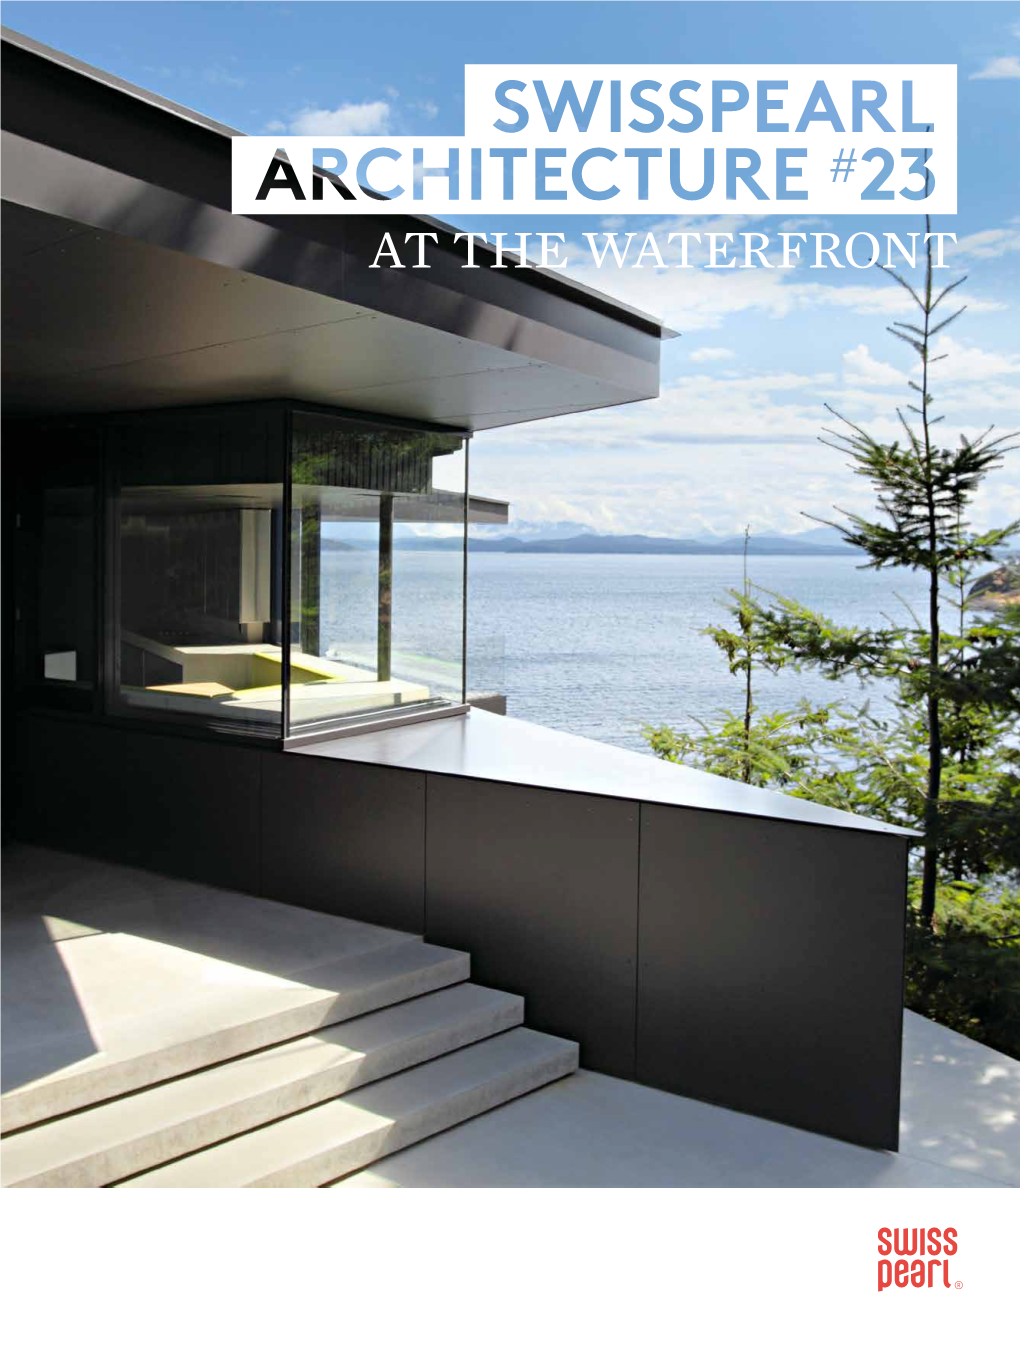 Swisspearl Architecture #23 December 2015 at the Waterfront the At